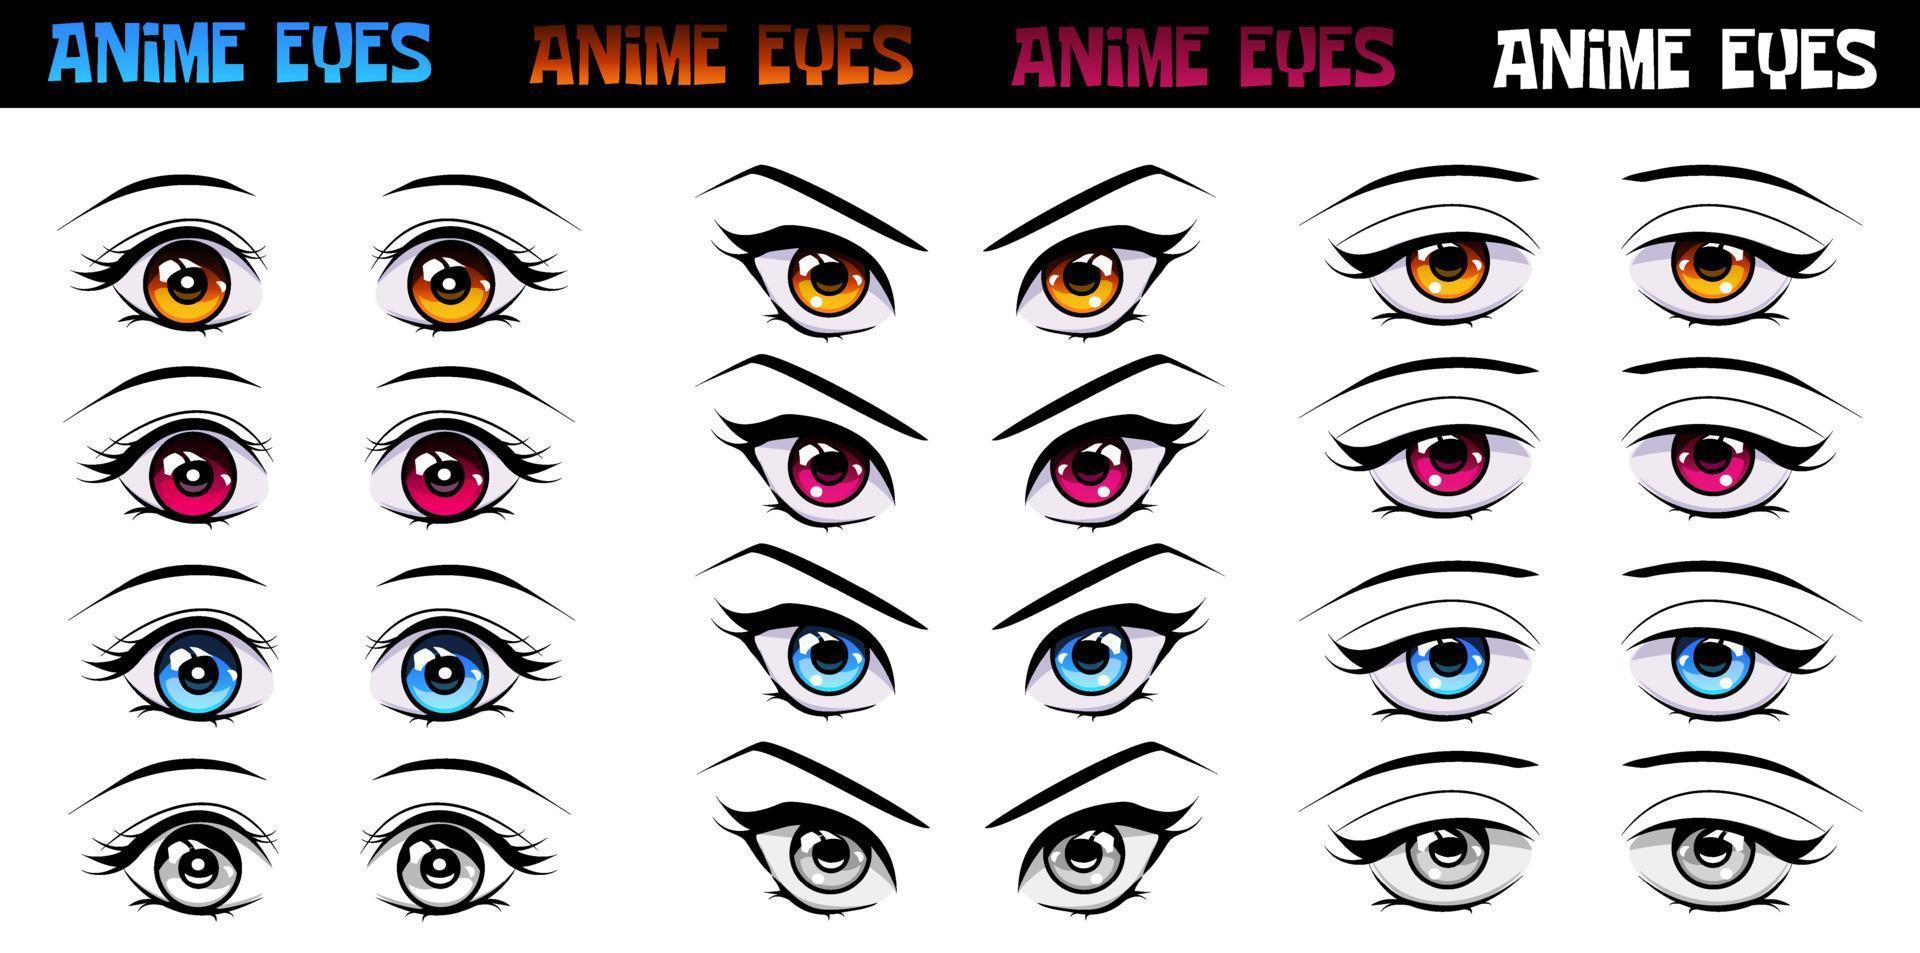 What do eye shapes mean in anime and manga  Quora